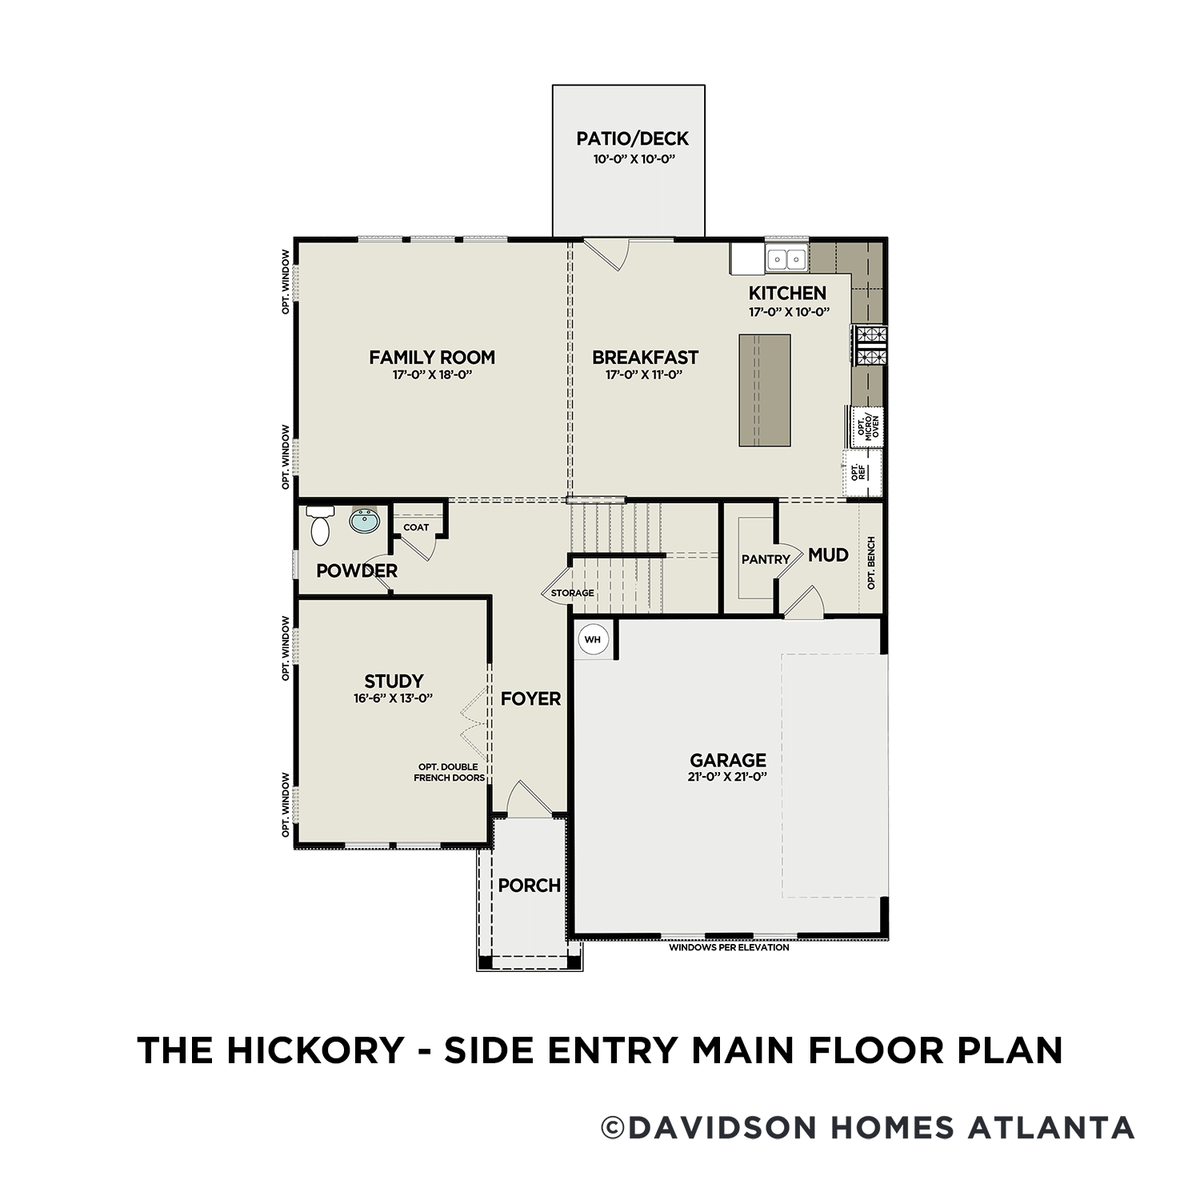 1 - The Hickory A – Side Entry buildable floor plan layout in Davidson Homes' Everleigh community.